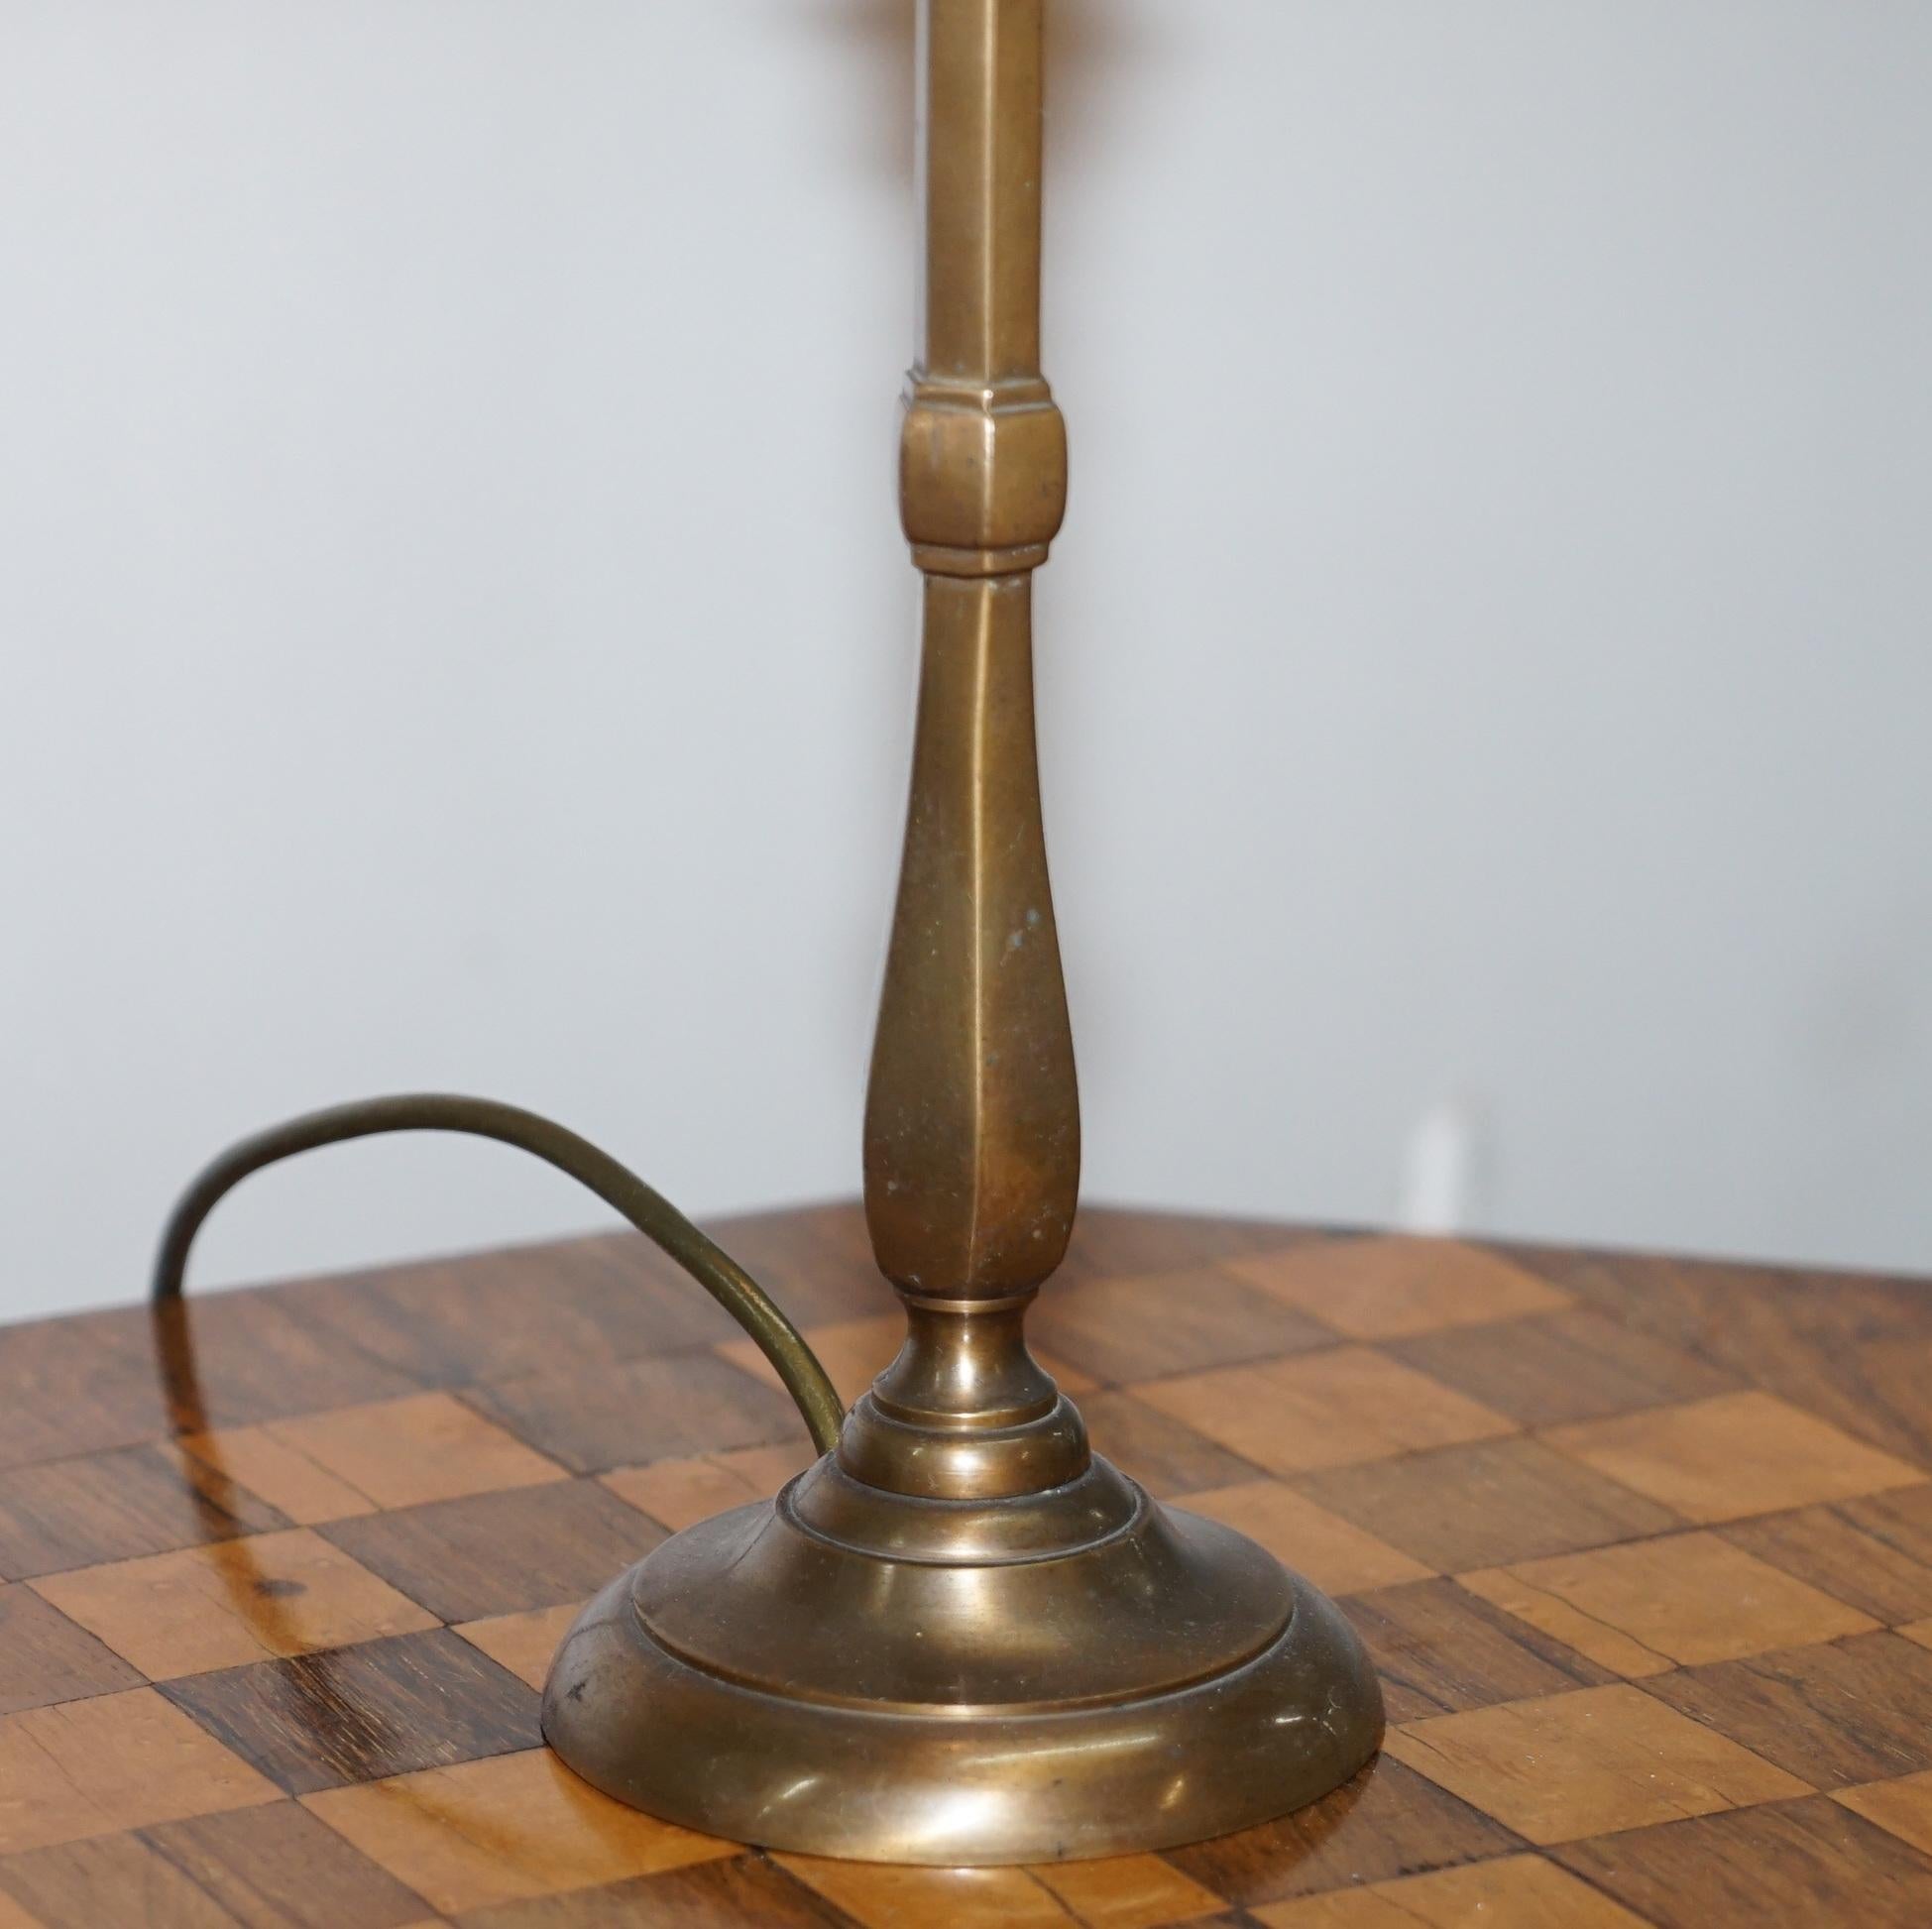 We are delighted to offer this well made vintage bronzed candle table lamp which has been fully restored

A good looking well made a decorative lamp

It has been fully restored to include a new light fitting, all new caballing and plug

Please